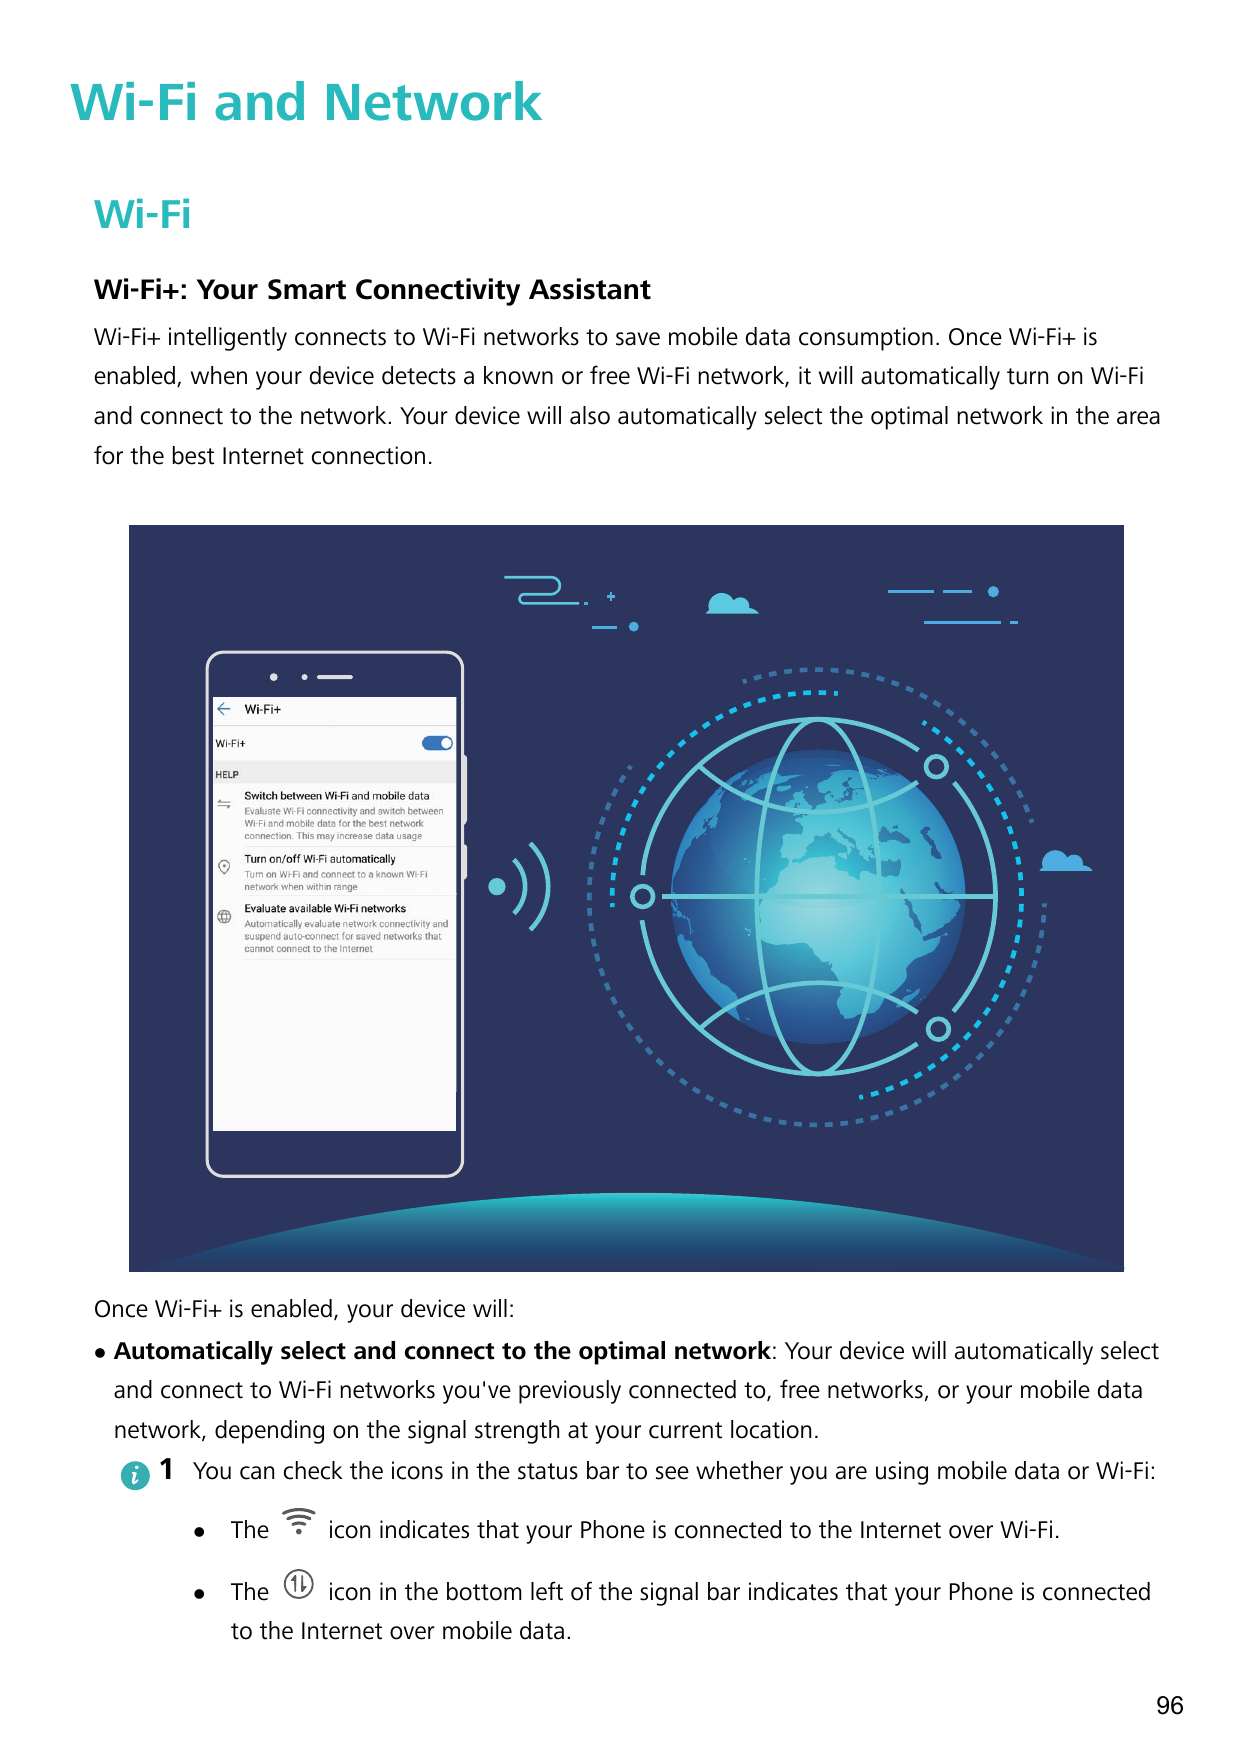 Wi-Fi and NetworkWi-FiWi-Fi+: Your Smart Connectivity AssistantWi-Fi+ intelligently connects to Wi-Fi networks to save mobile da